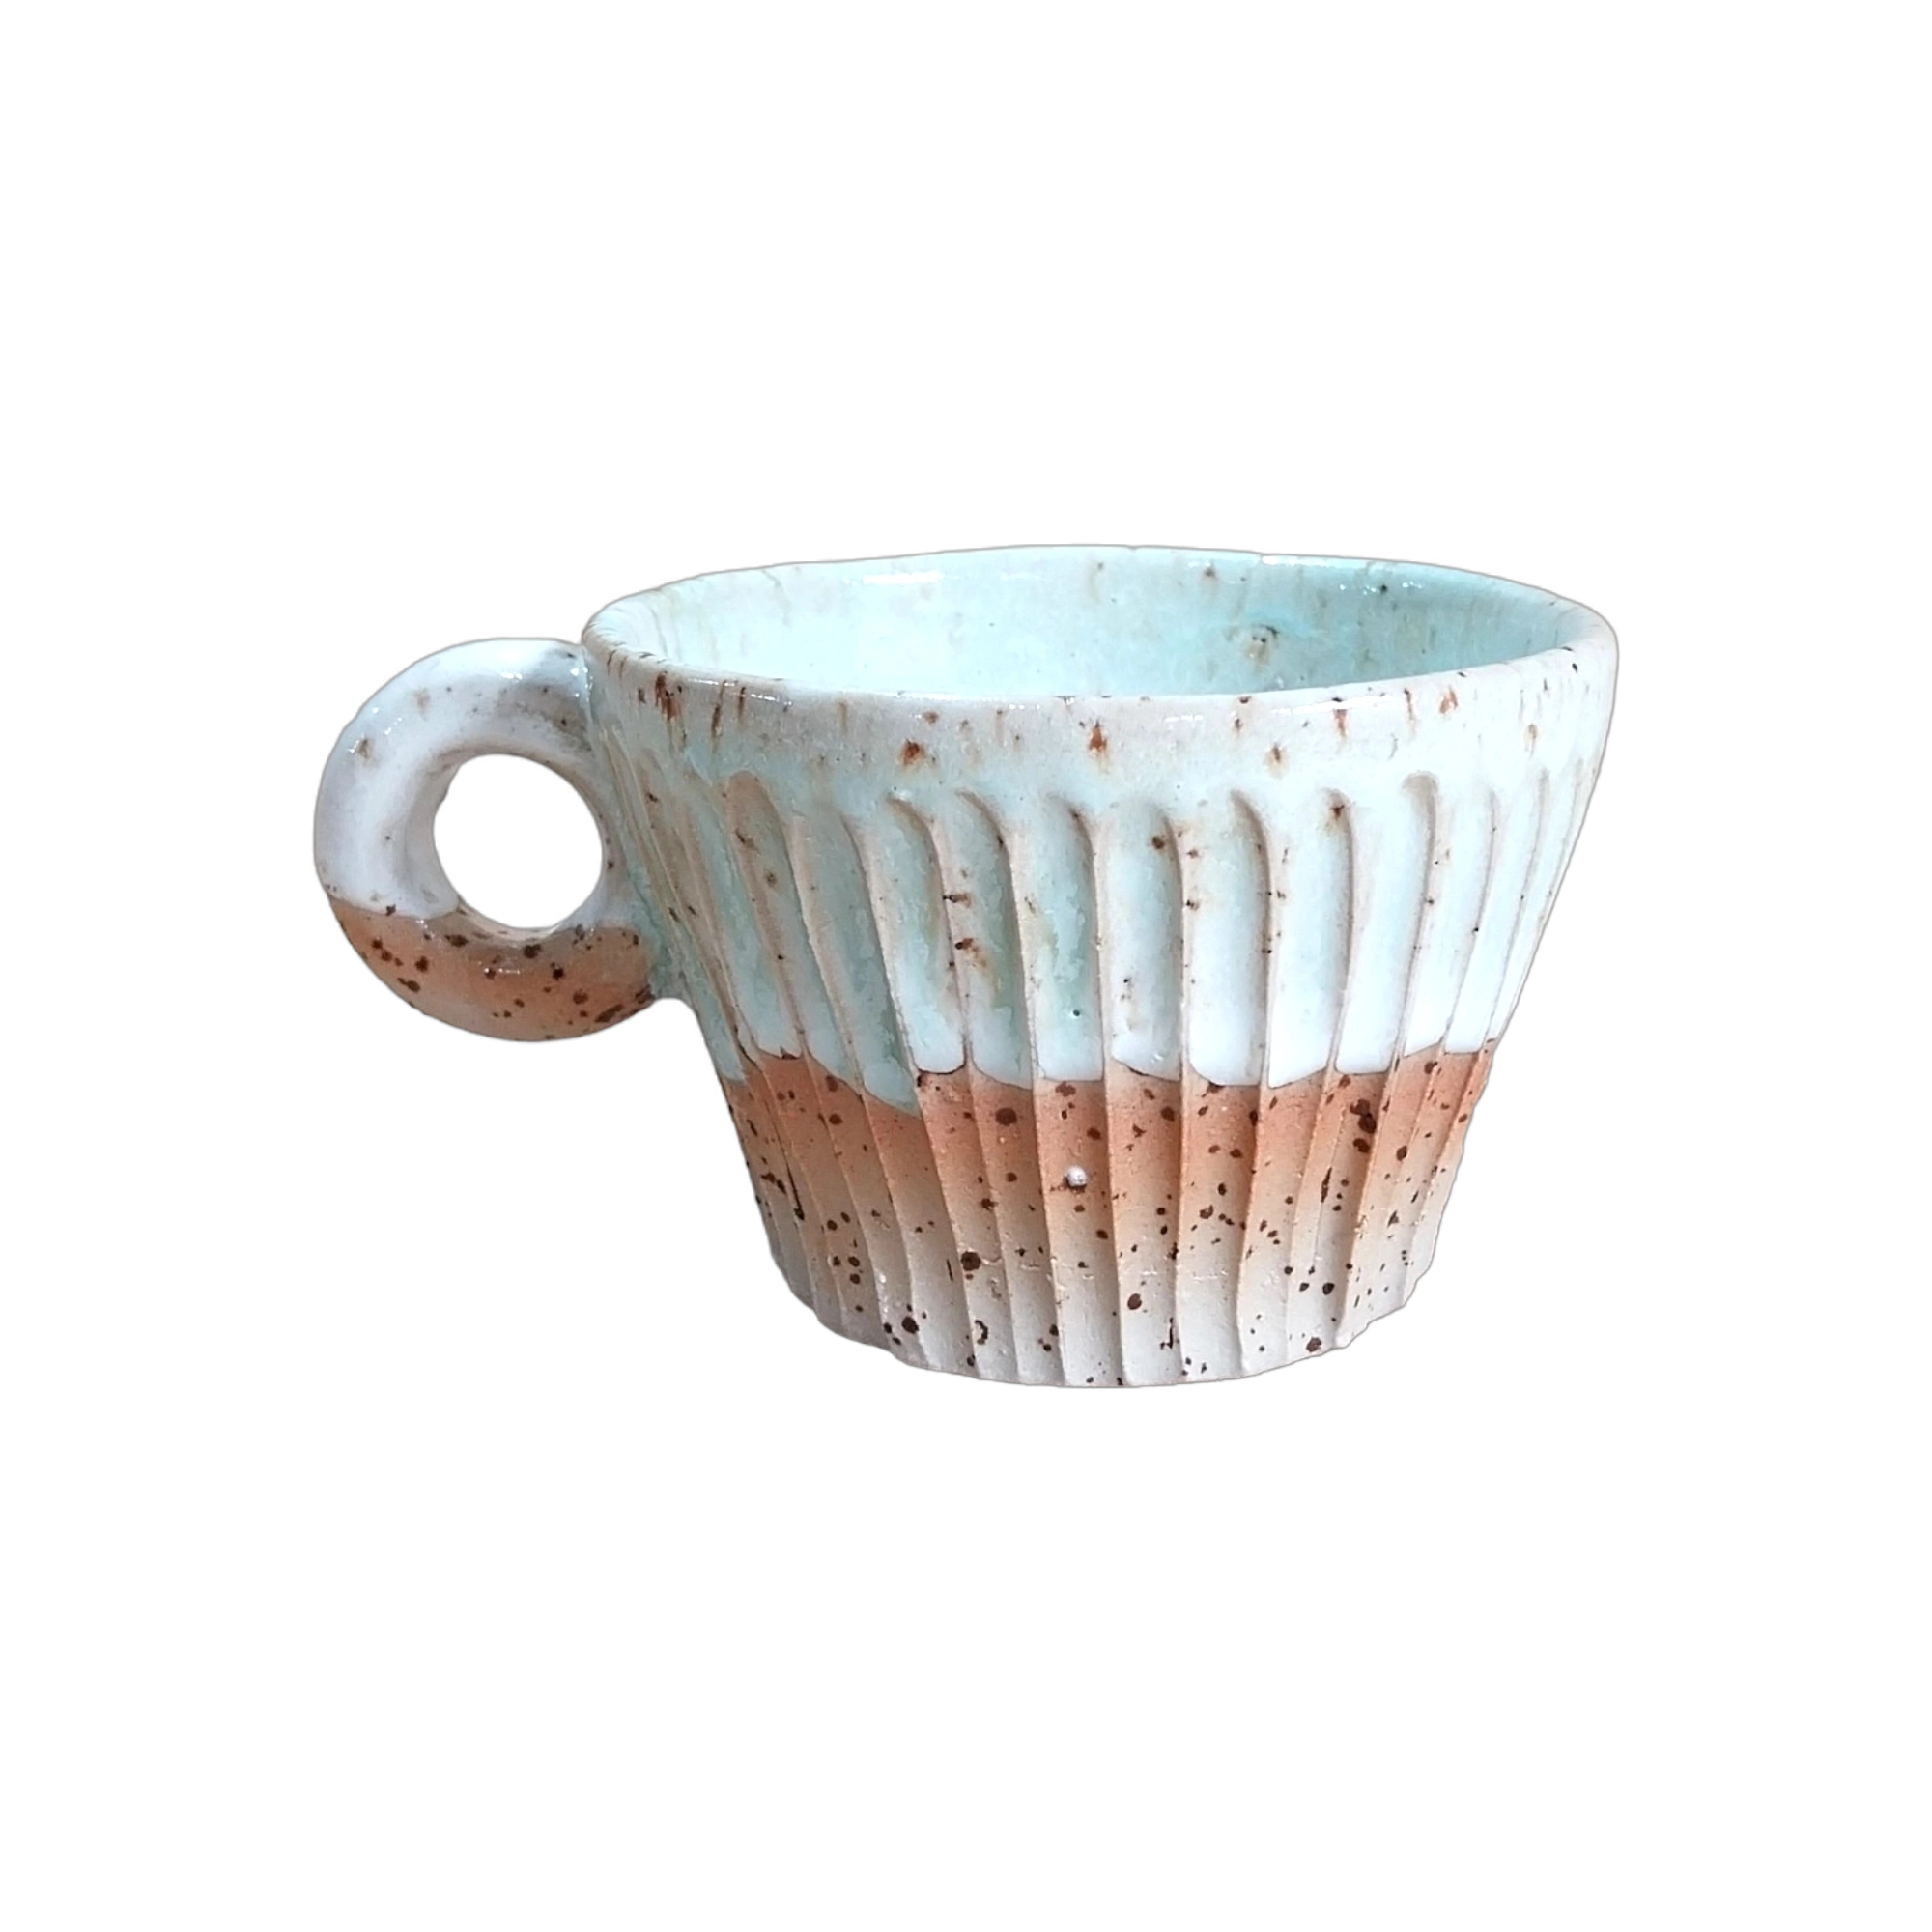 Set of Wide Mugs with Vertical Striped Textures (2 pieces)